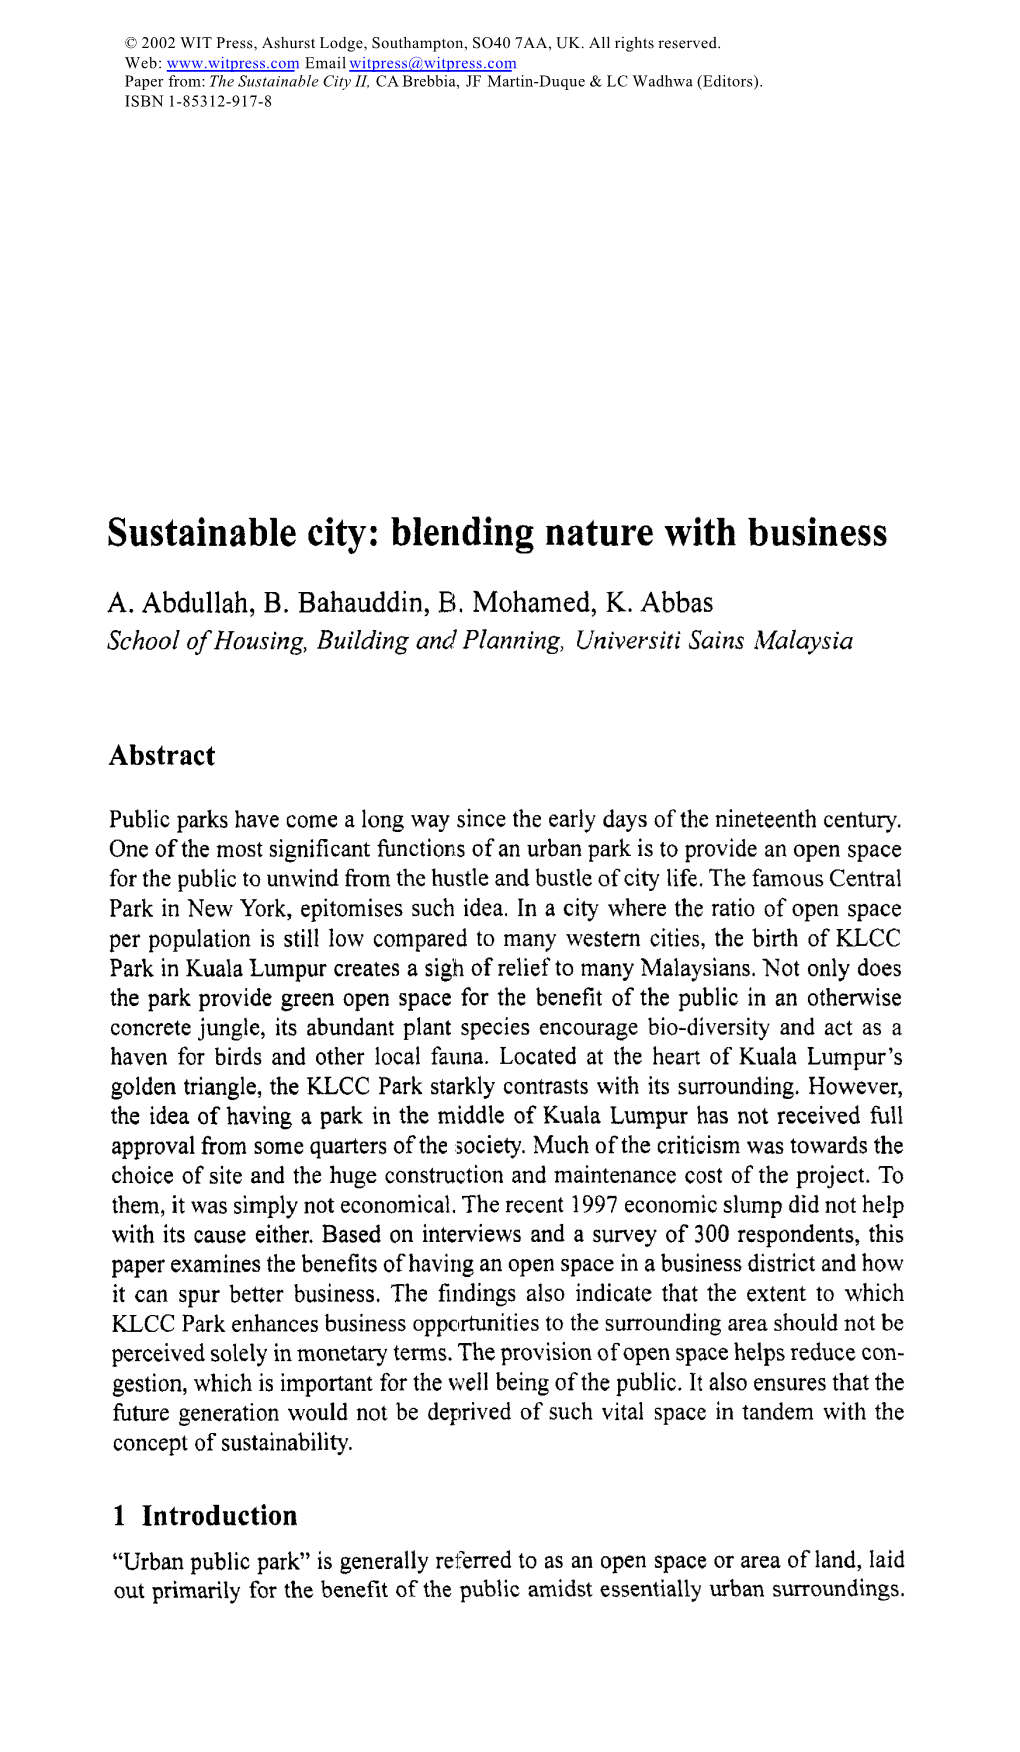 Sustainable City: Blending Nature with Business